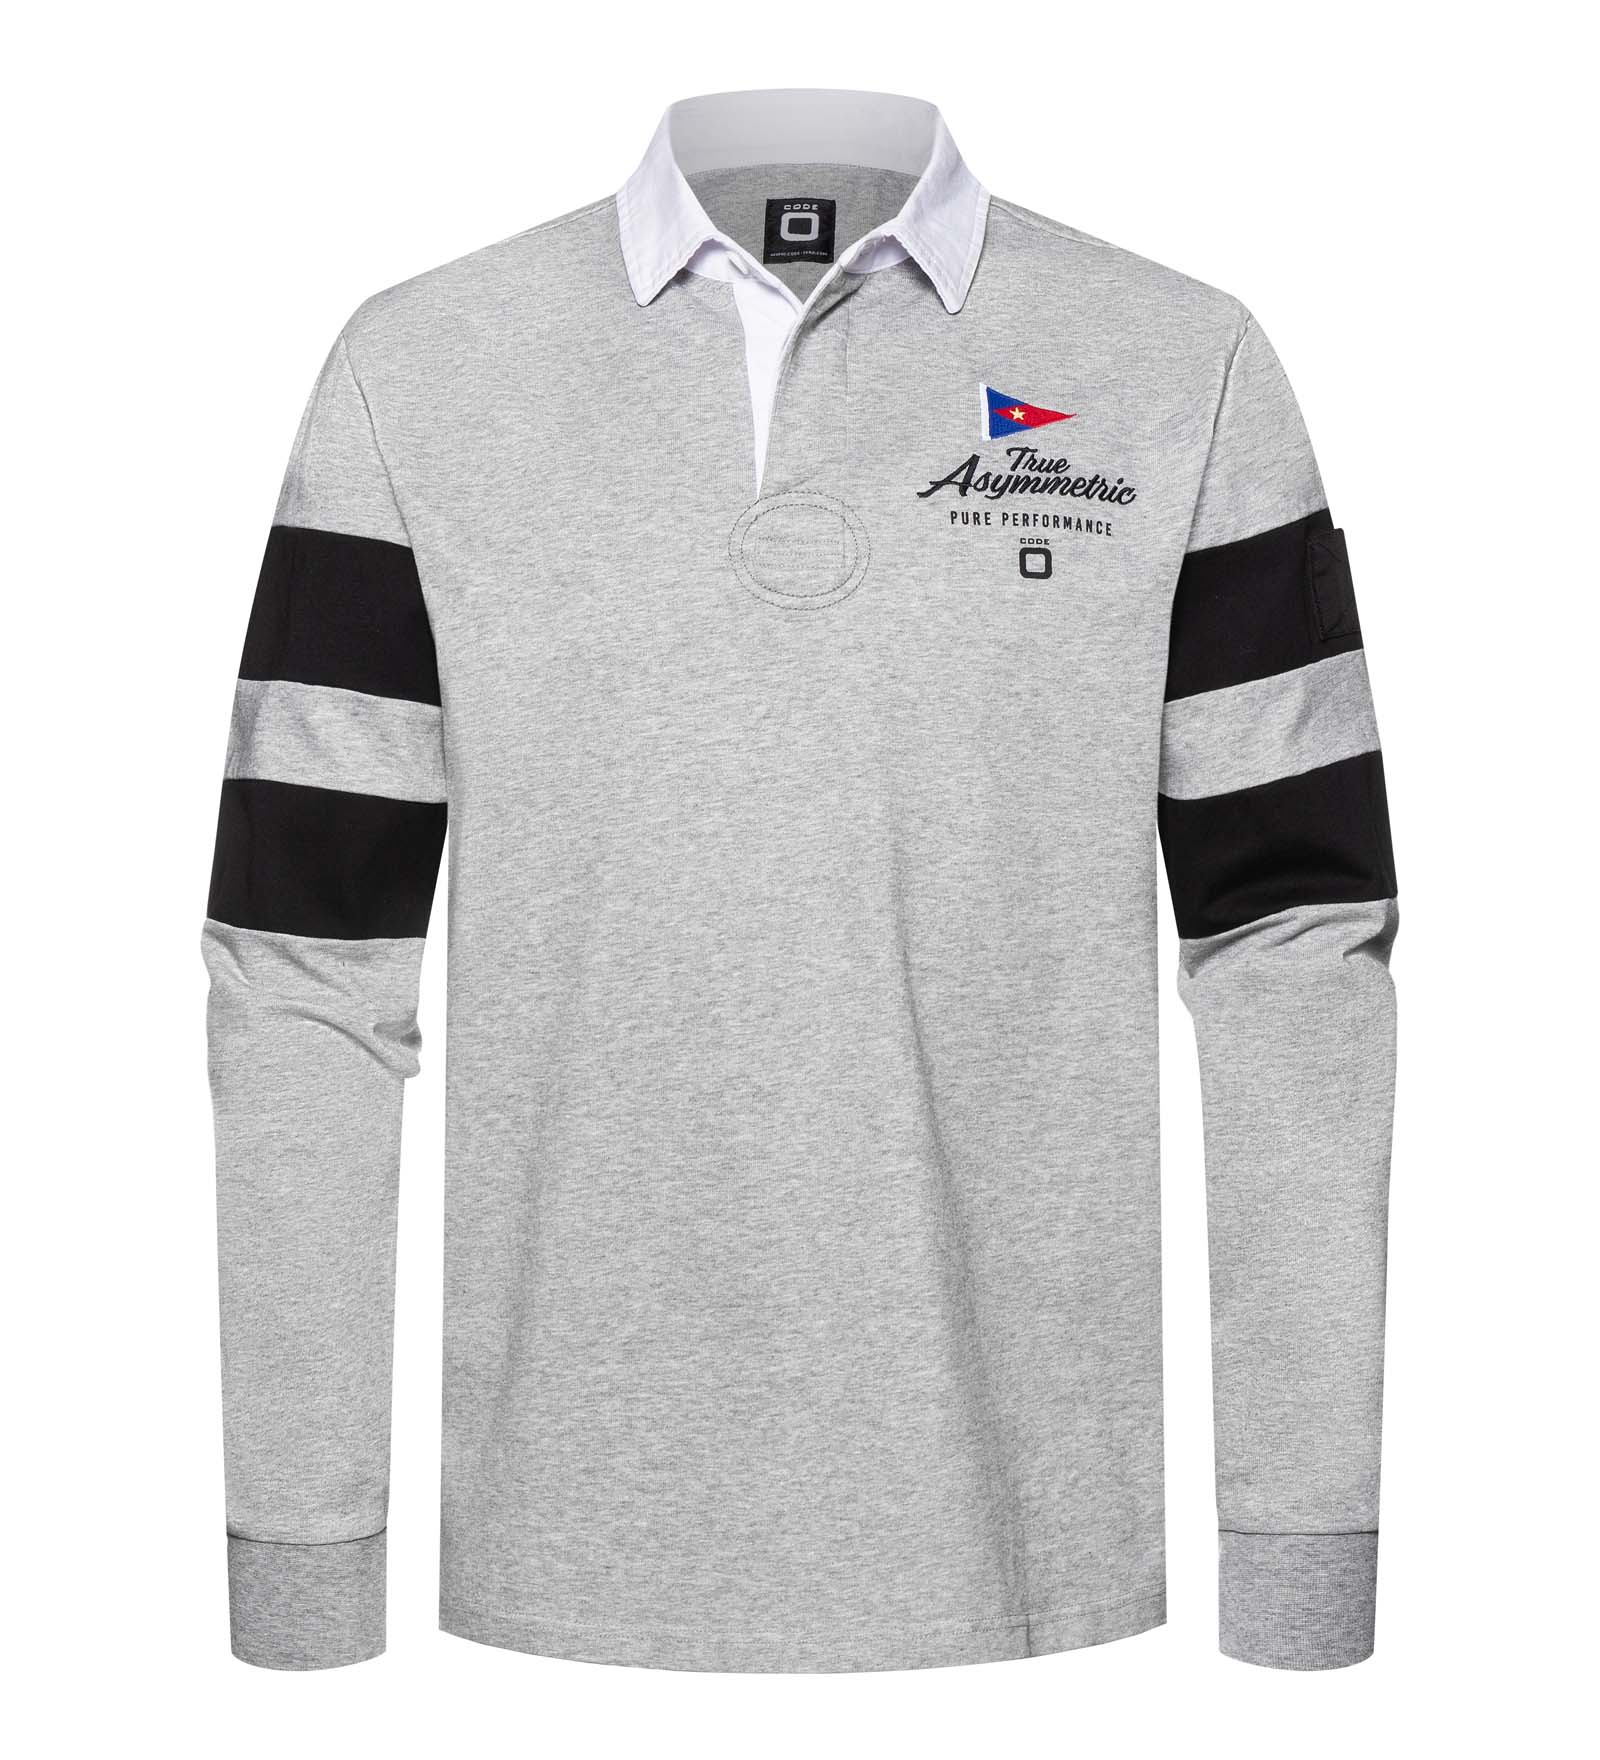 Chemise de rugby